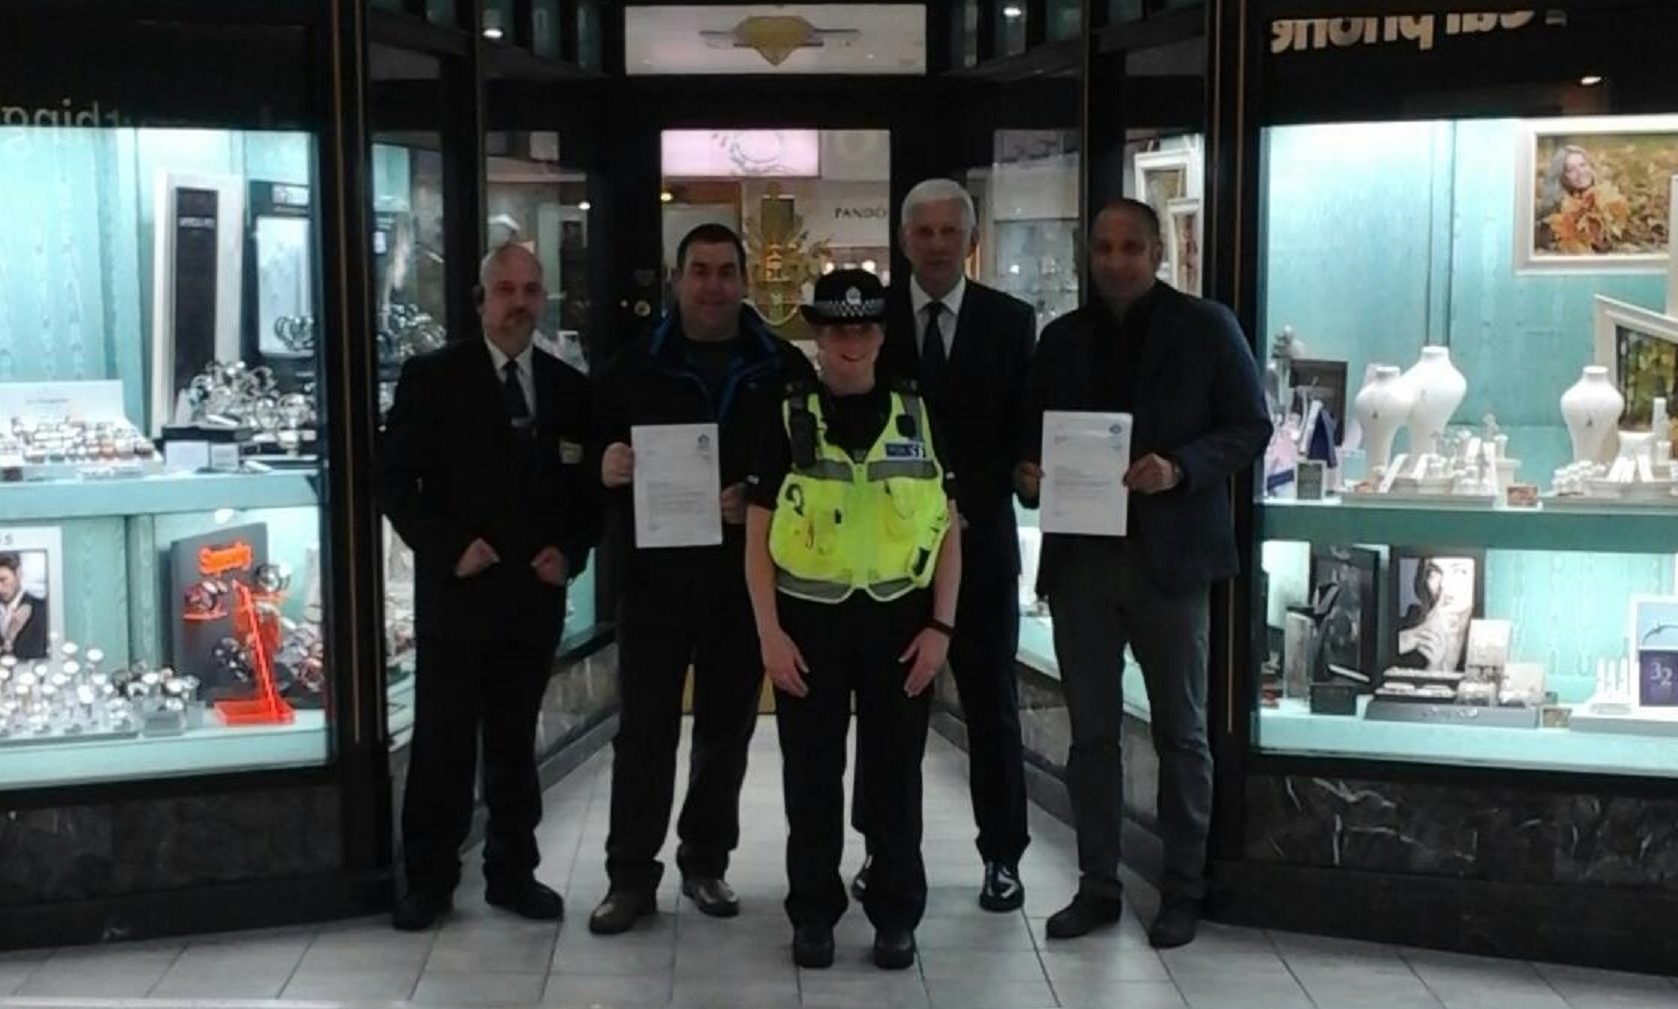 Pictured from left to right are James McGregor, security, Kenneth Oliver, PC Laura Piercy, Paul Jessop and Mustapha Zemoura